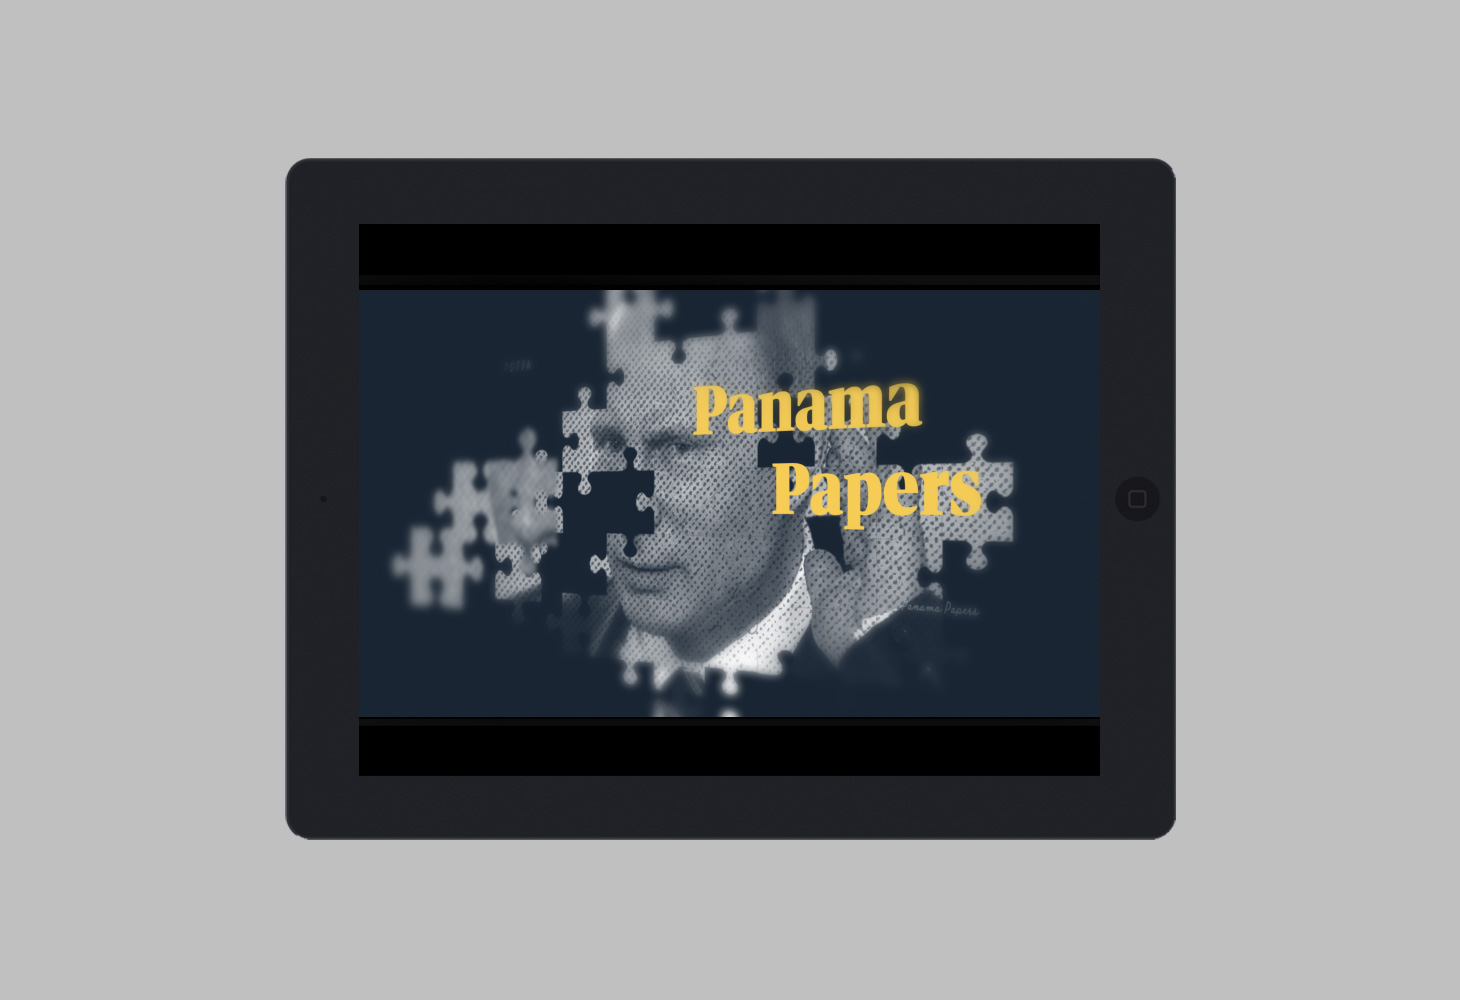 Guardian Investigations - Panama Papers